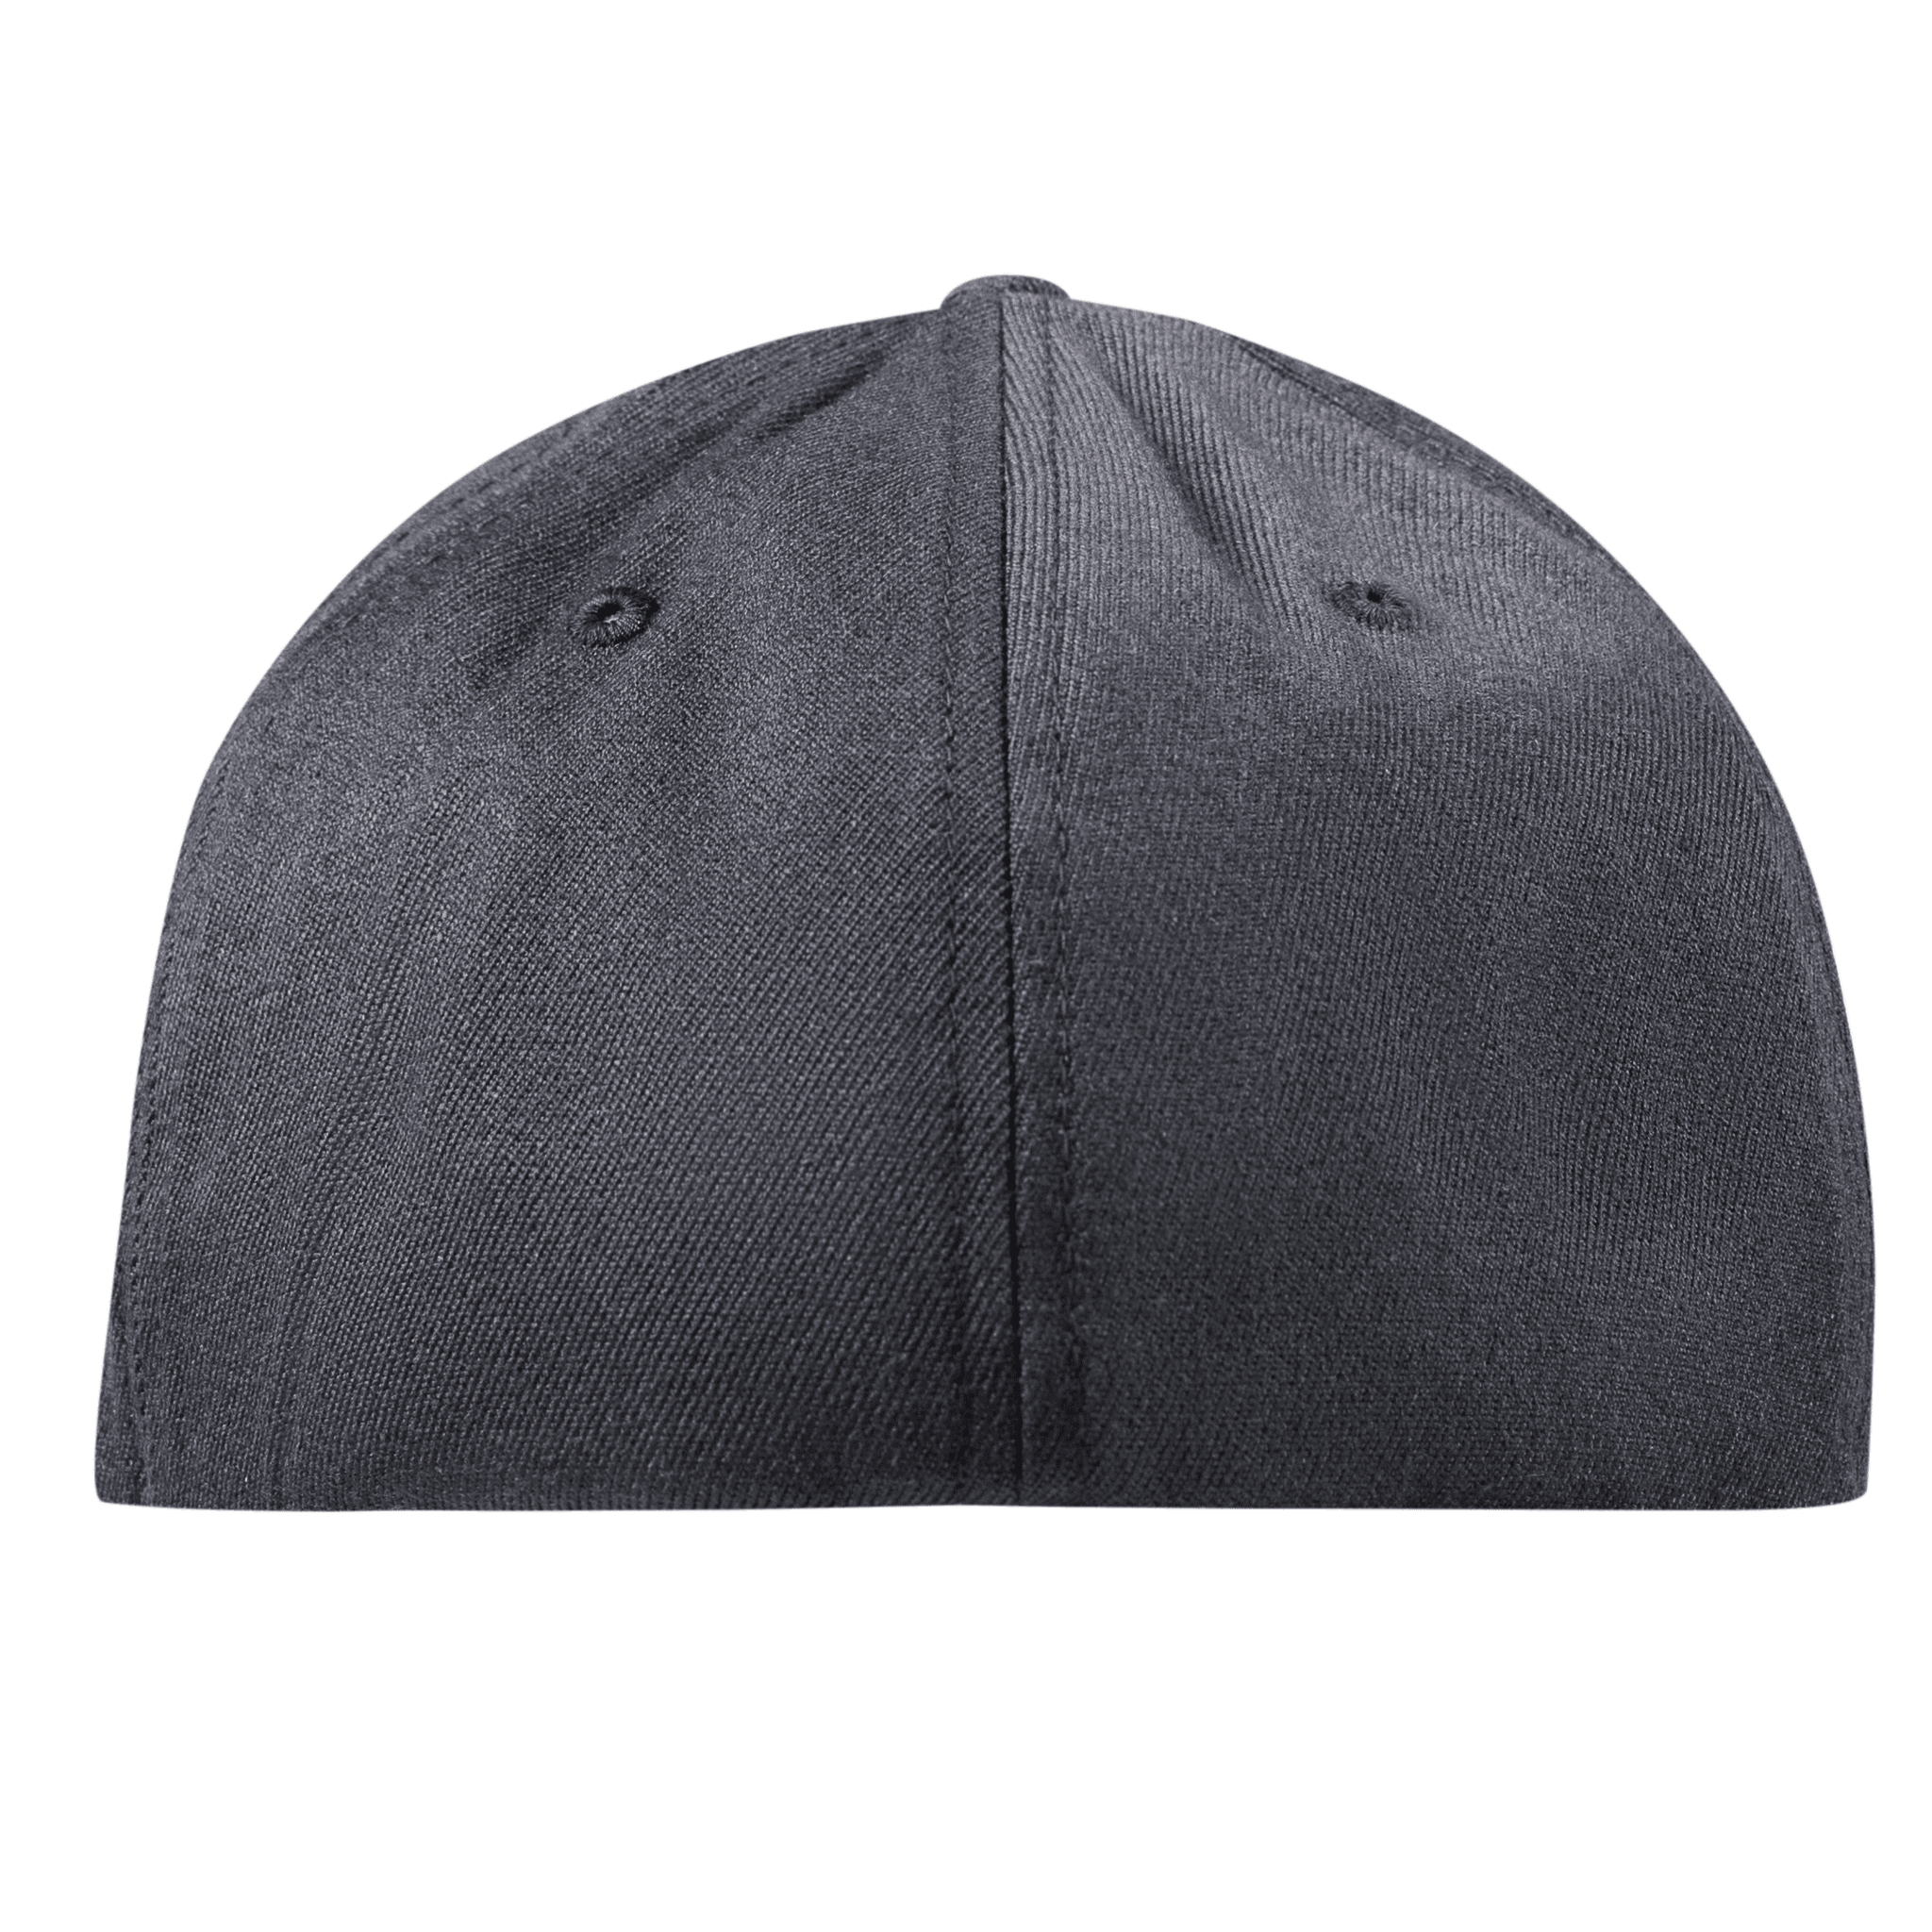 Wisconsin 30 PVC Flexfit Fitted Back Charcoal